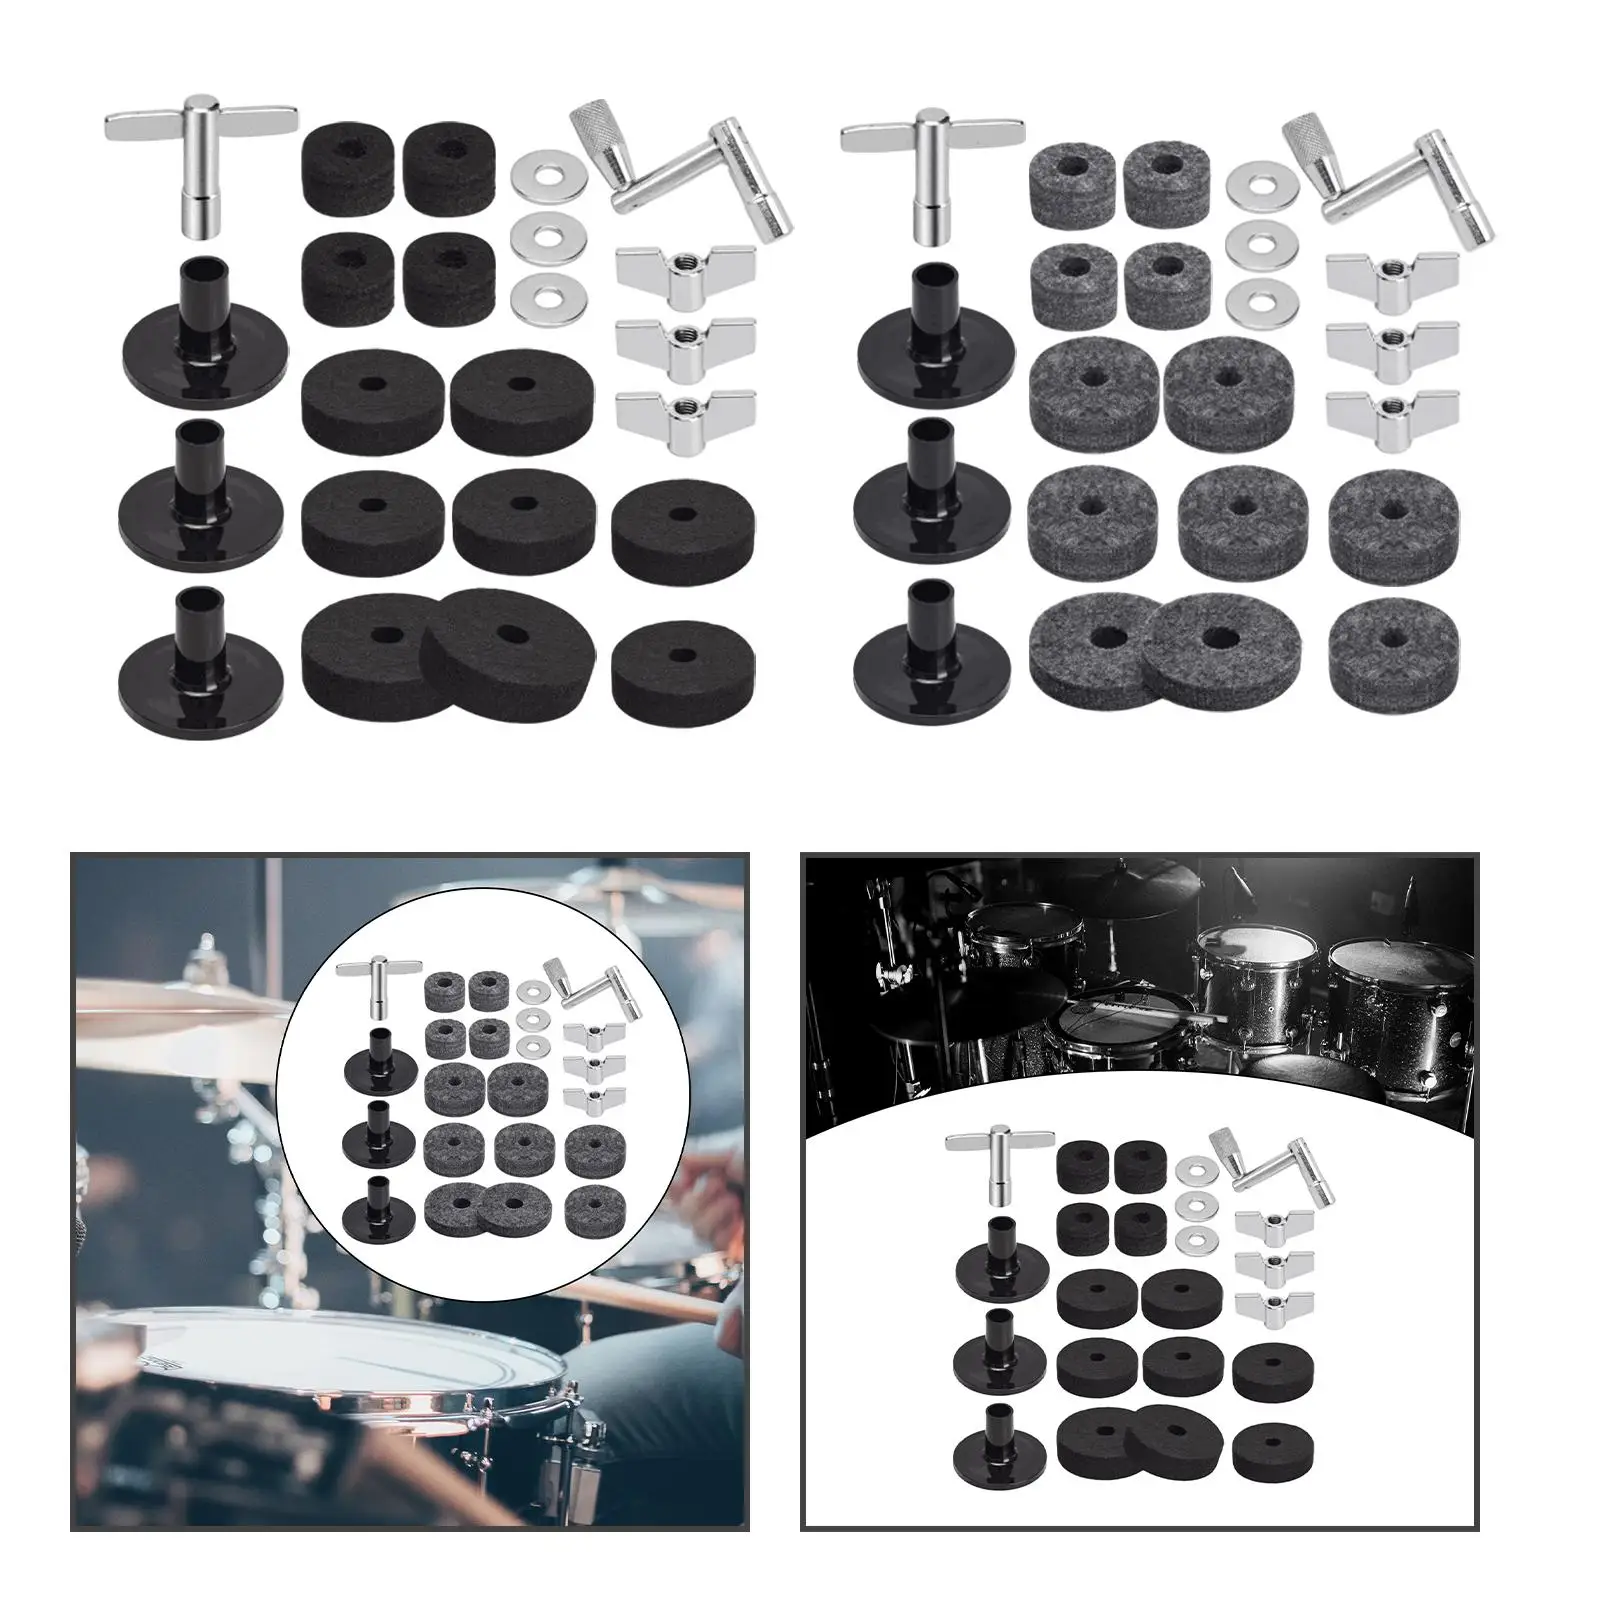 23 Pieces Cymbal Replacement Lightweight Percussion Instrument Parts for Drum